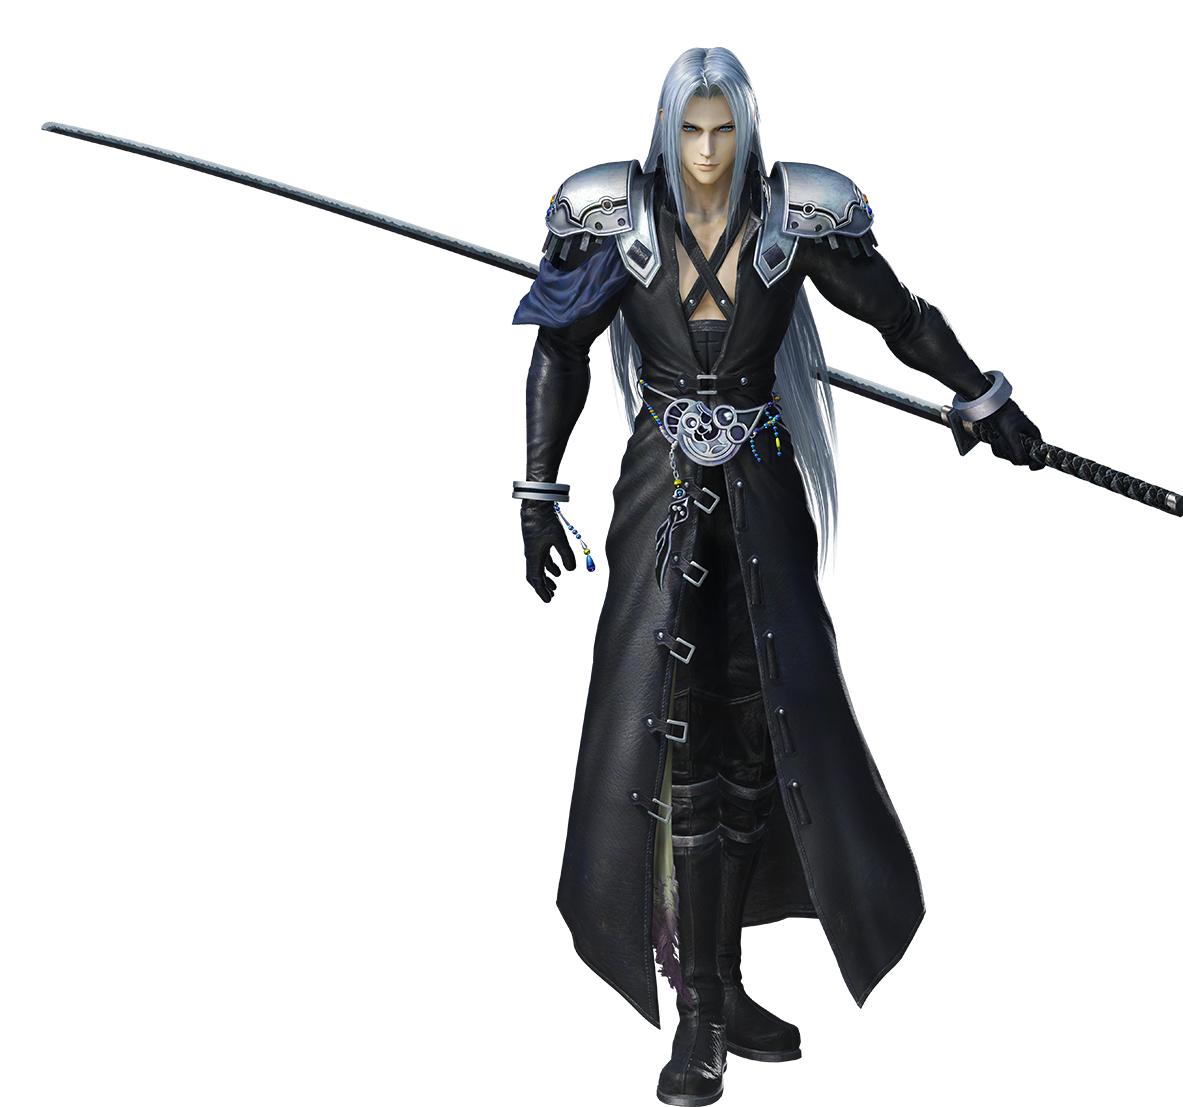 Image Dff2015 Sephiroth Cgpng Final Fantasy Wiki Fandom Powered